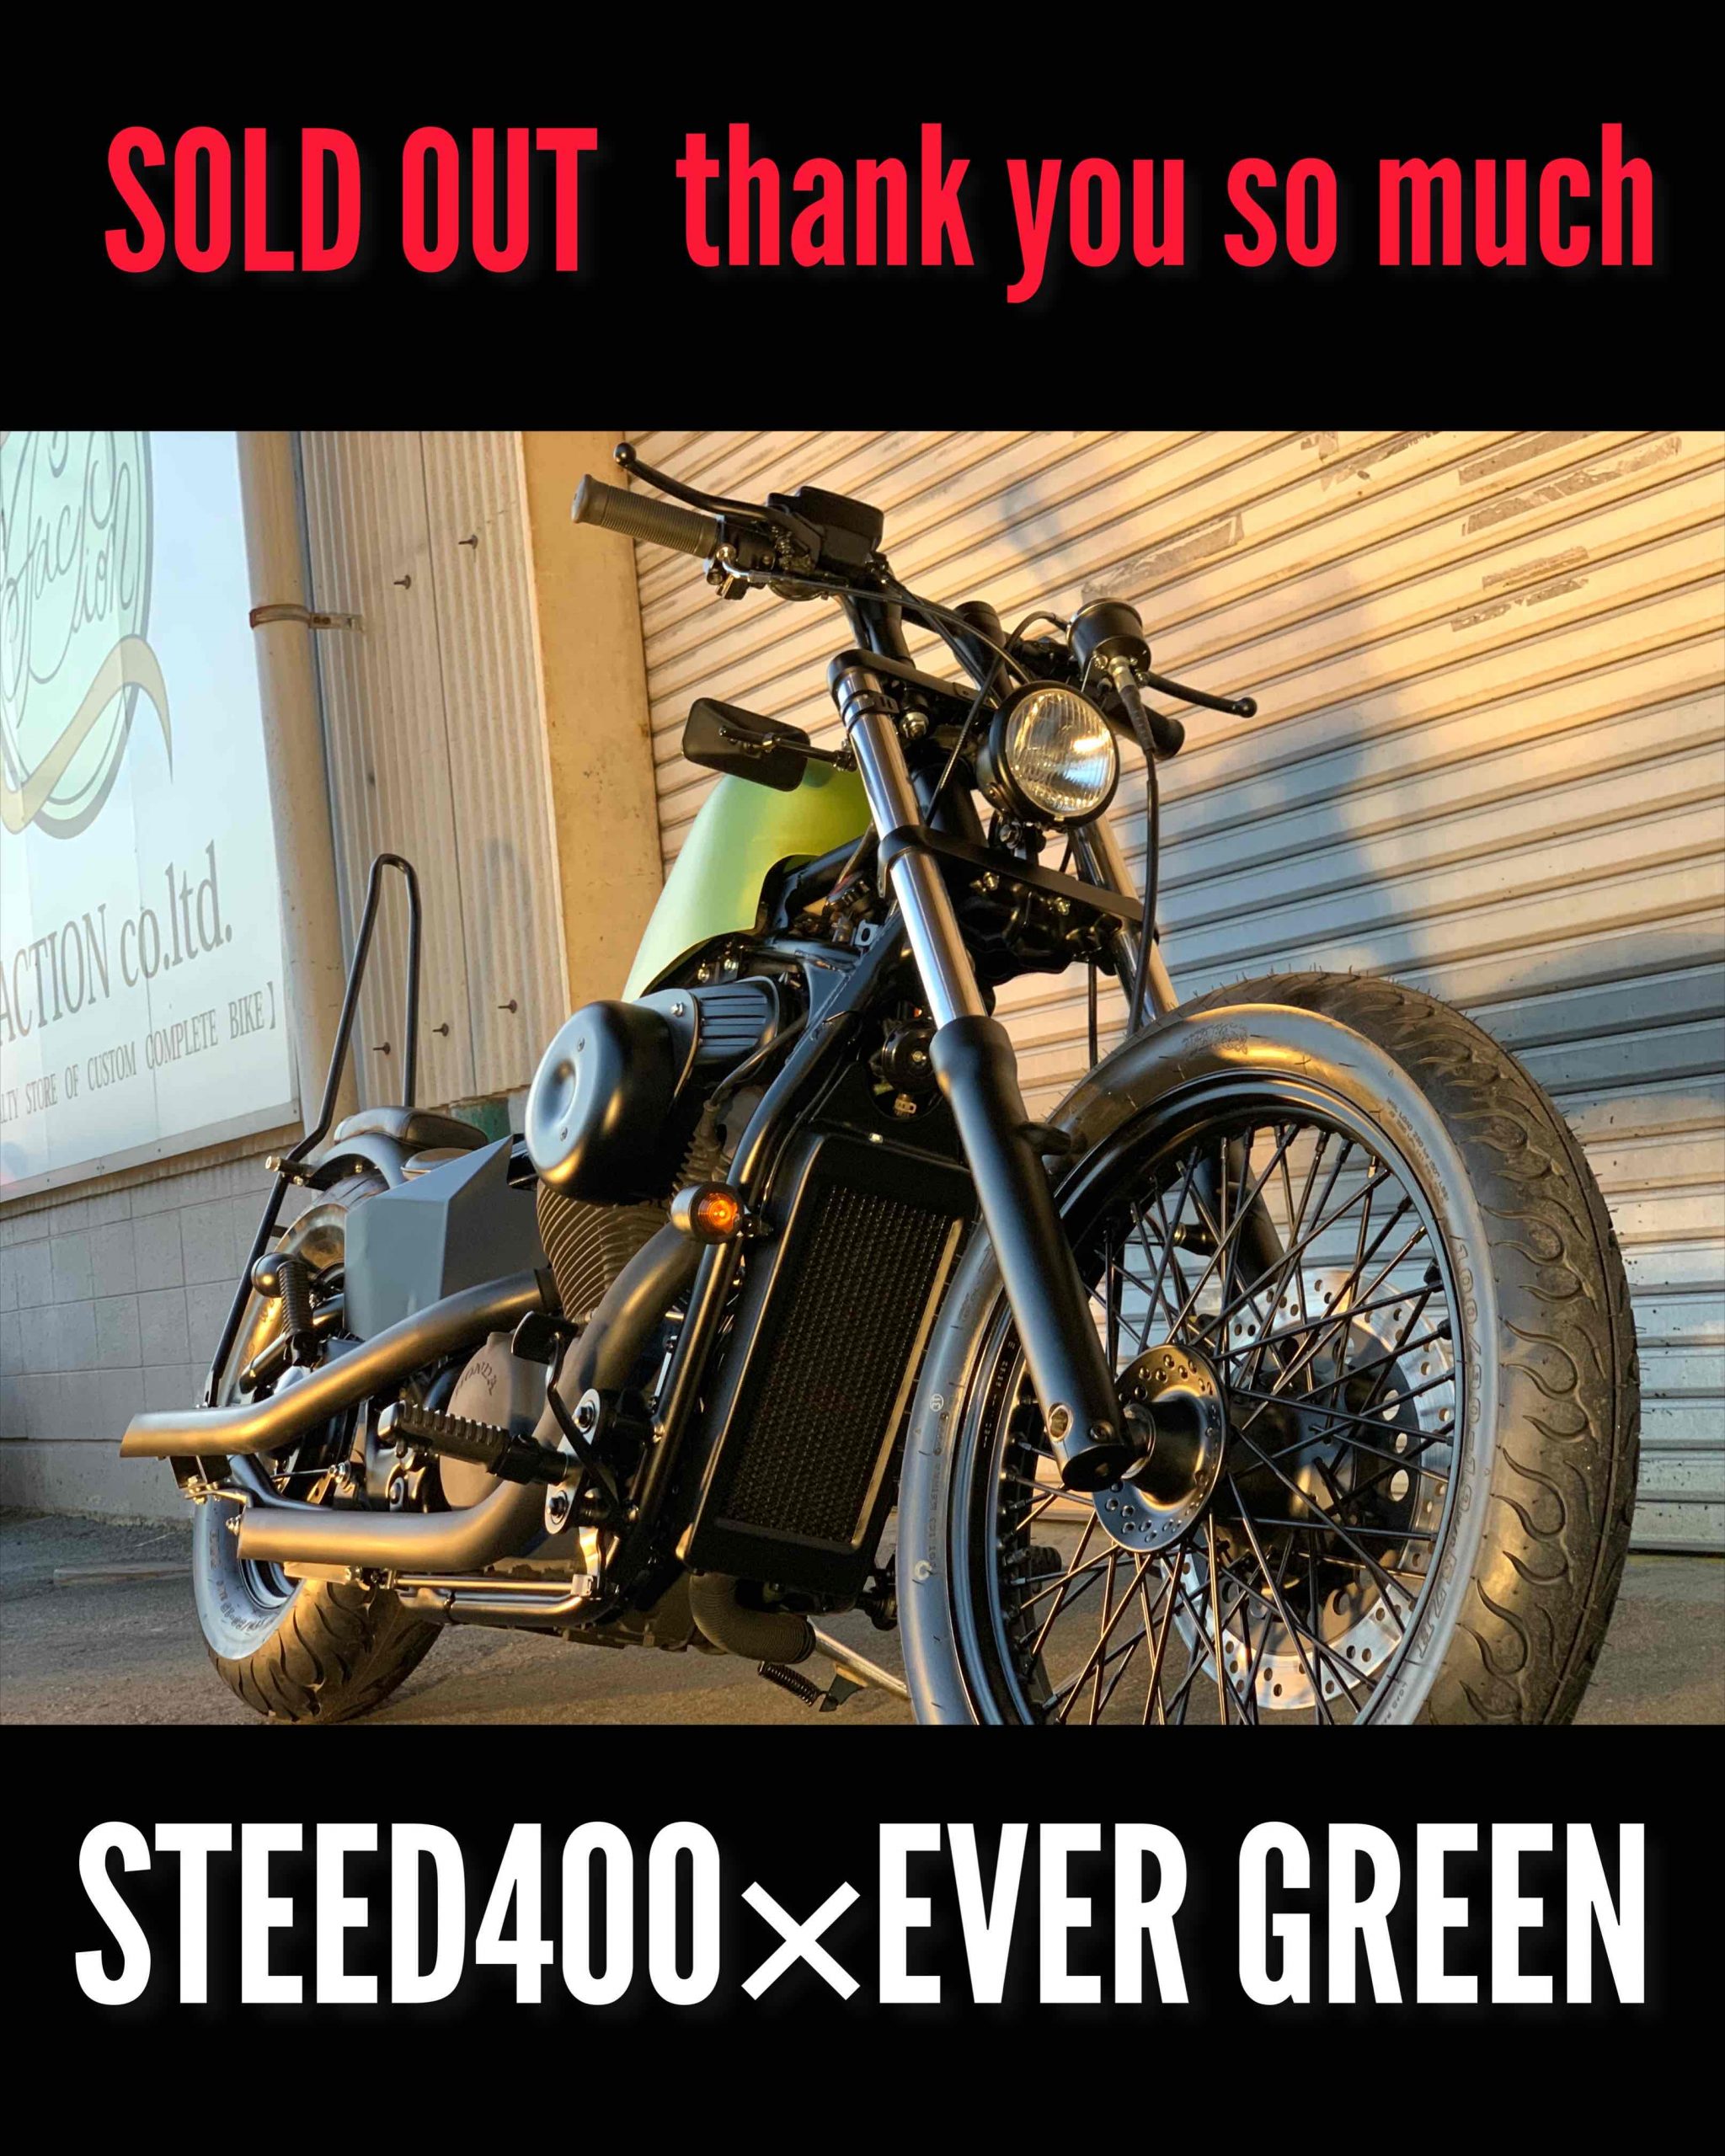 STEED400×EVER GREEN　御成約ありがとうございました☆